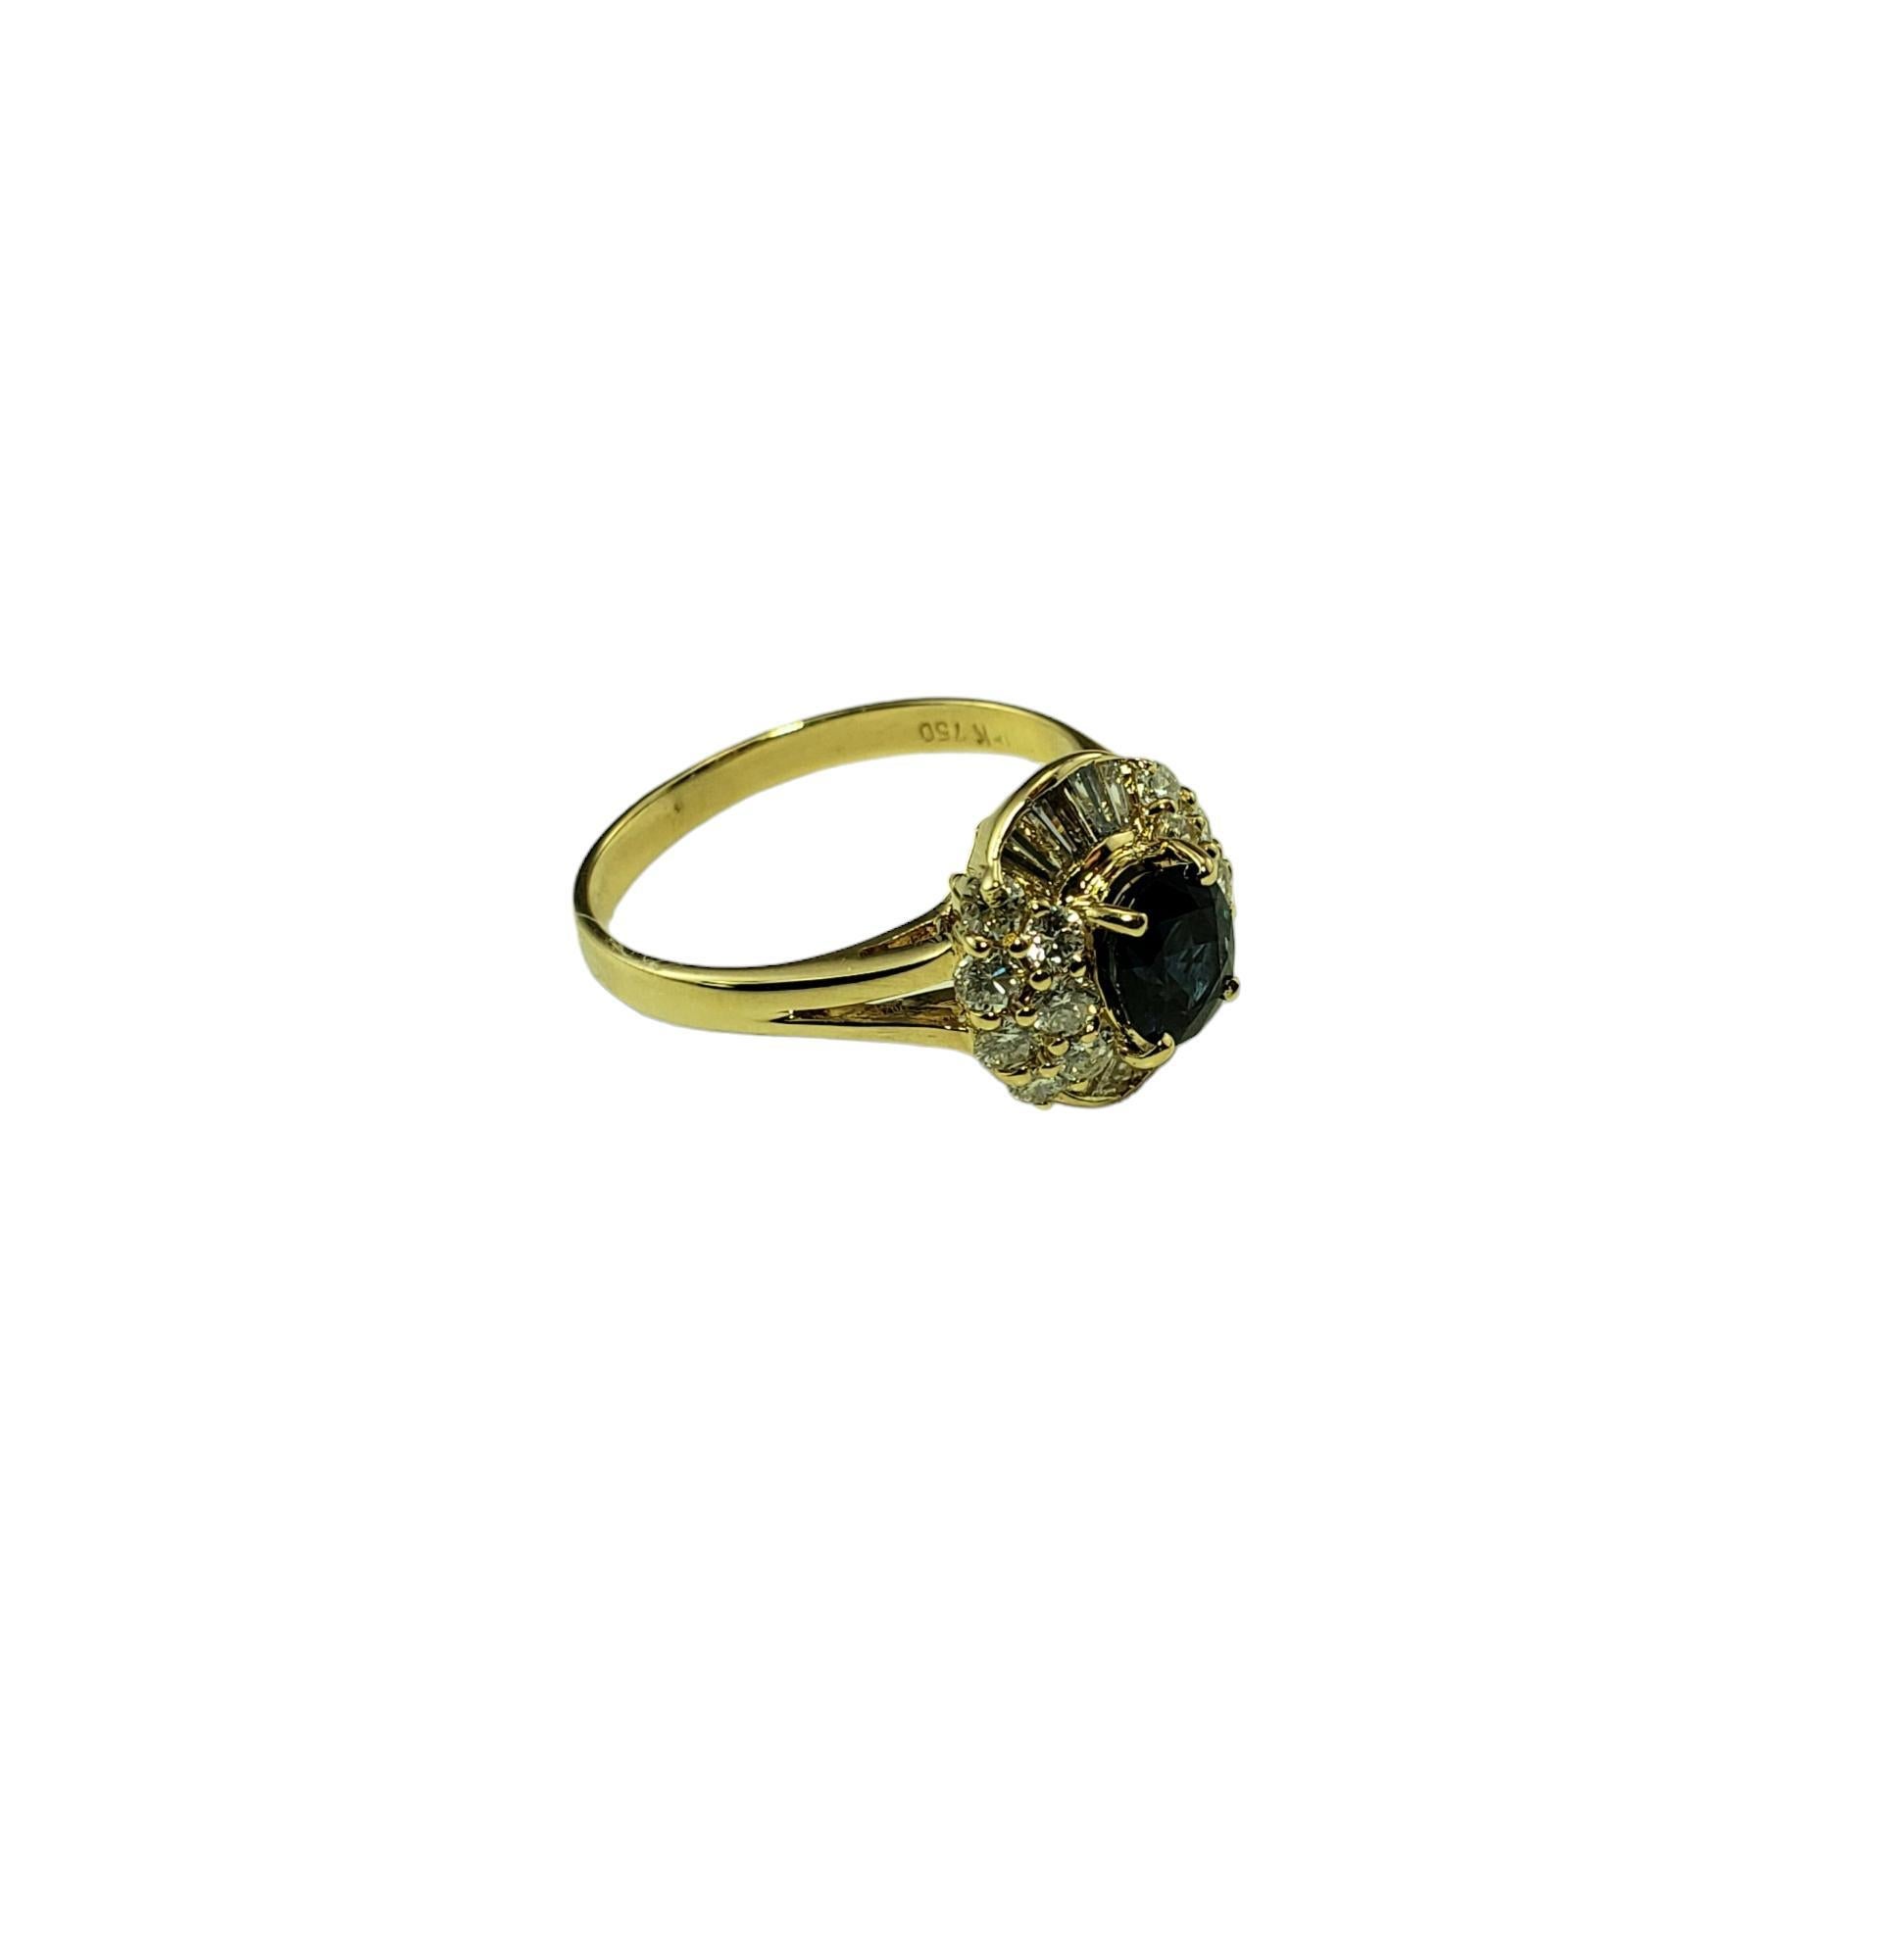 Vintage 18K Yellow Gold Sapphire and Diamond Ring Size 7.5 JAGi Certified-

This stunning ring features one oval sapphire (6.1 mm x 5.1 mm), 8 baguette cut diamonds and 14 round brilliant cut diamonds set in classic 18K yellow gold.  Width: 12 mm. 